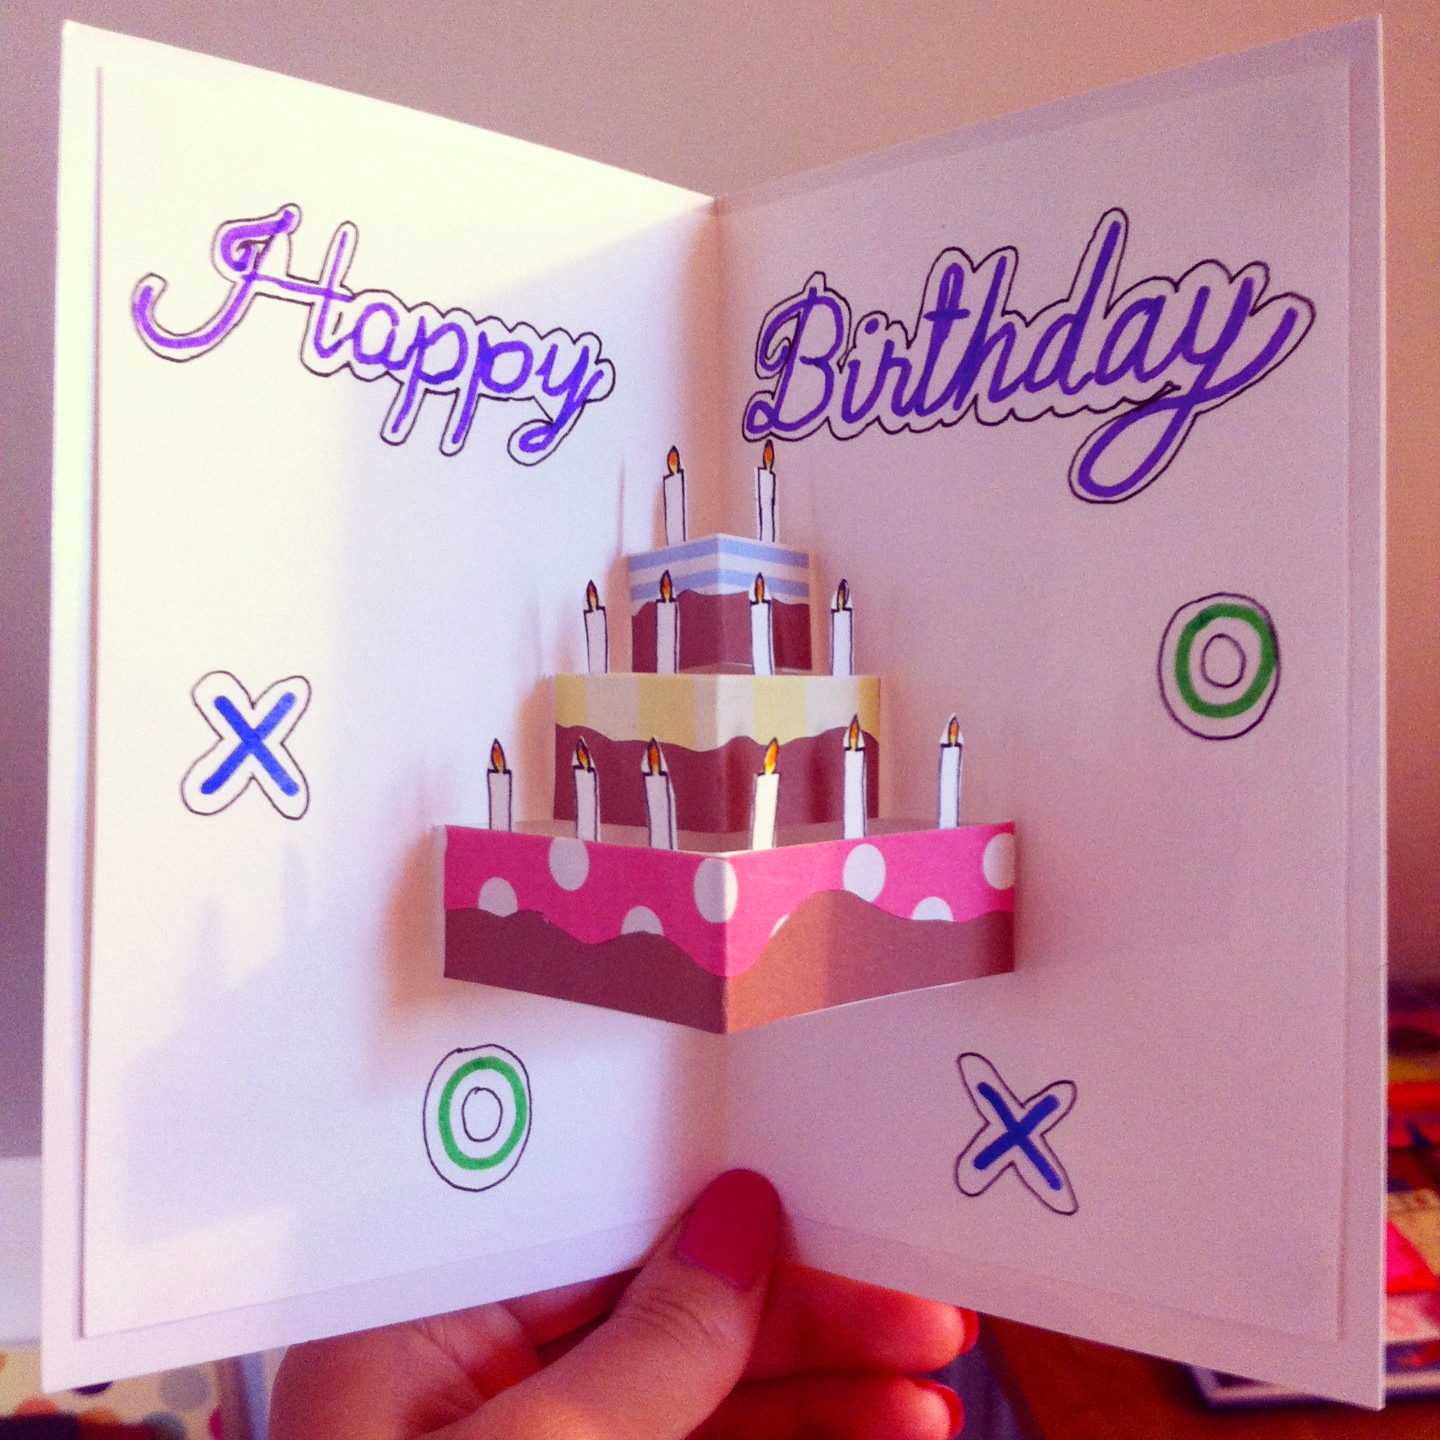 Idea Of Making Birthday Card 93 Ideas To Make A Birthday Card Create Birthday Cards 35